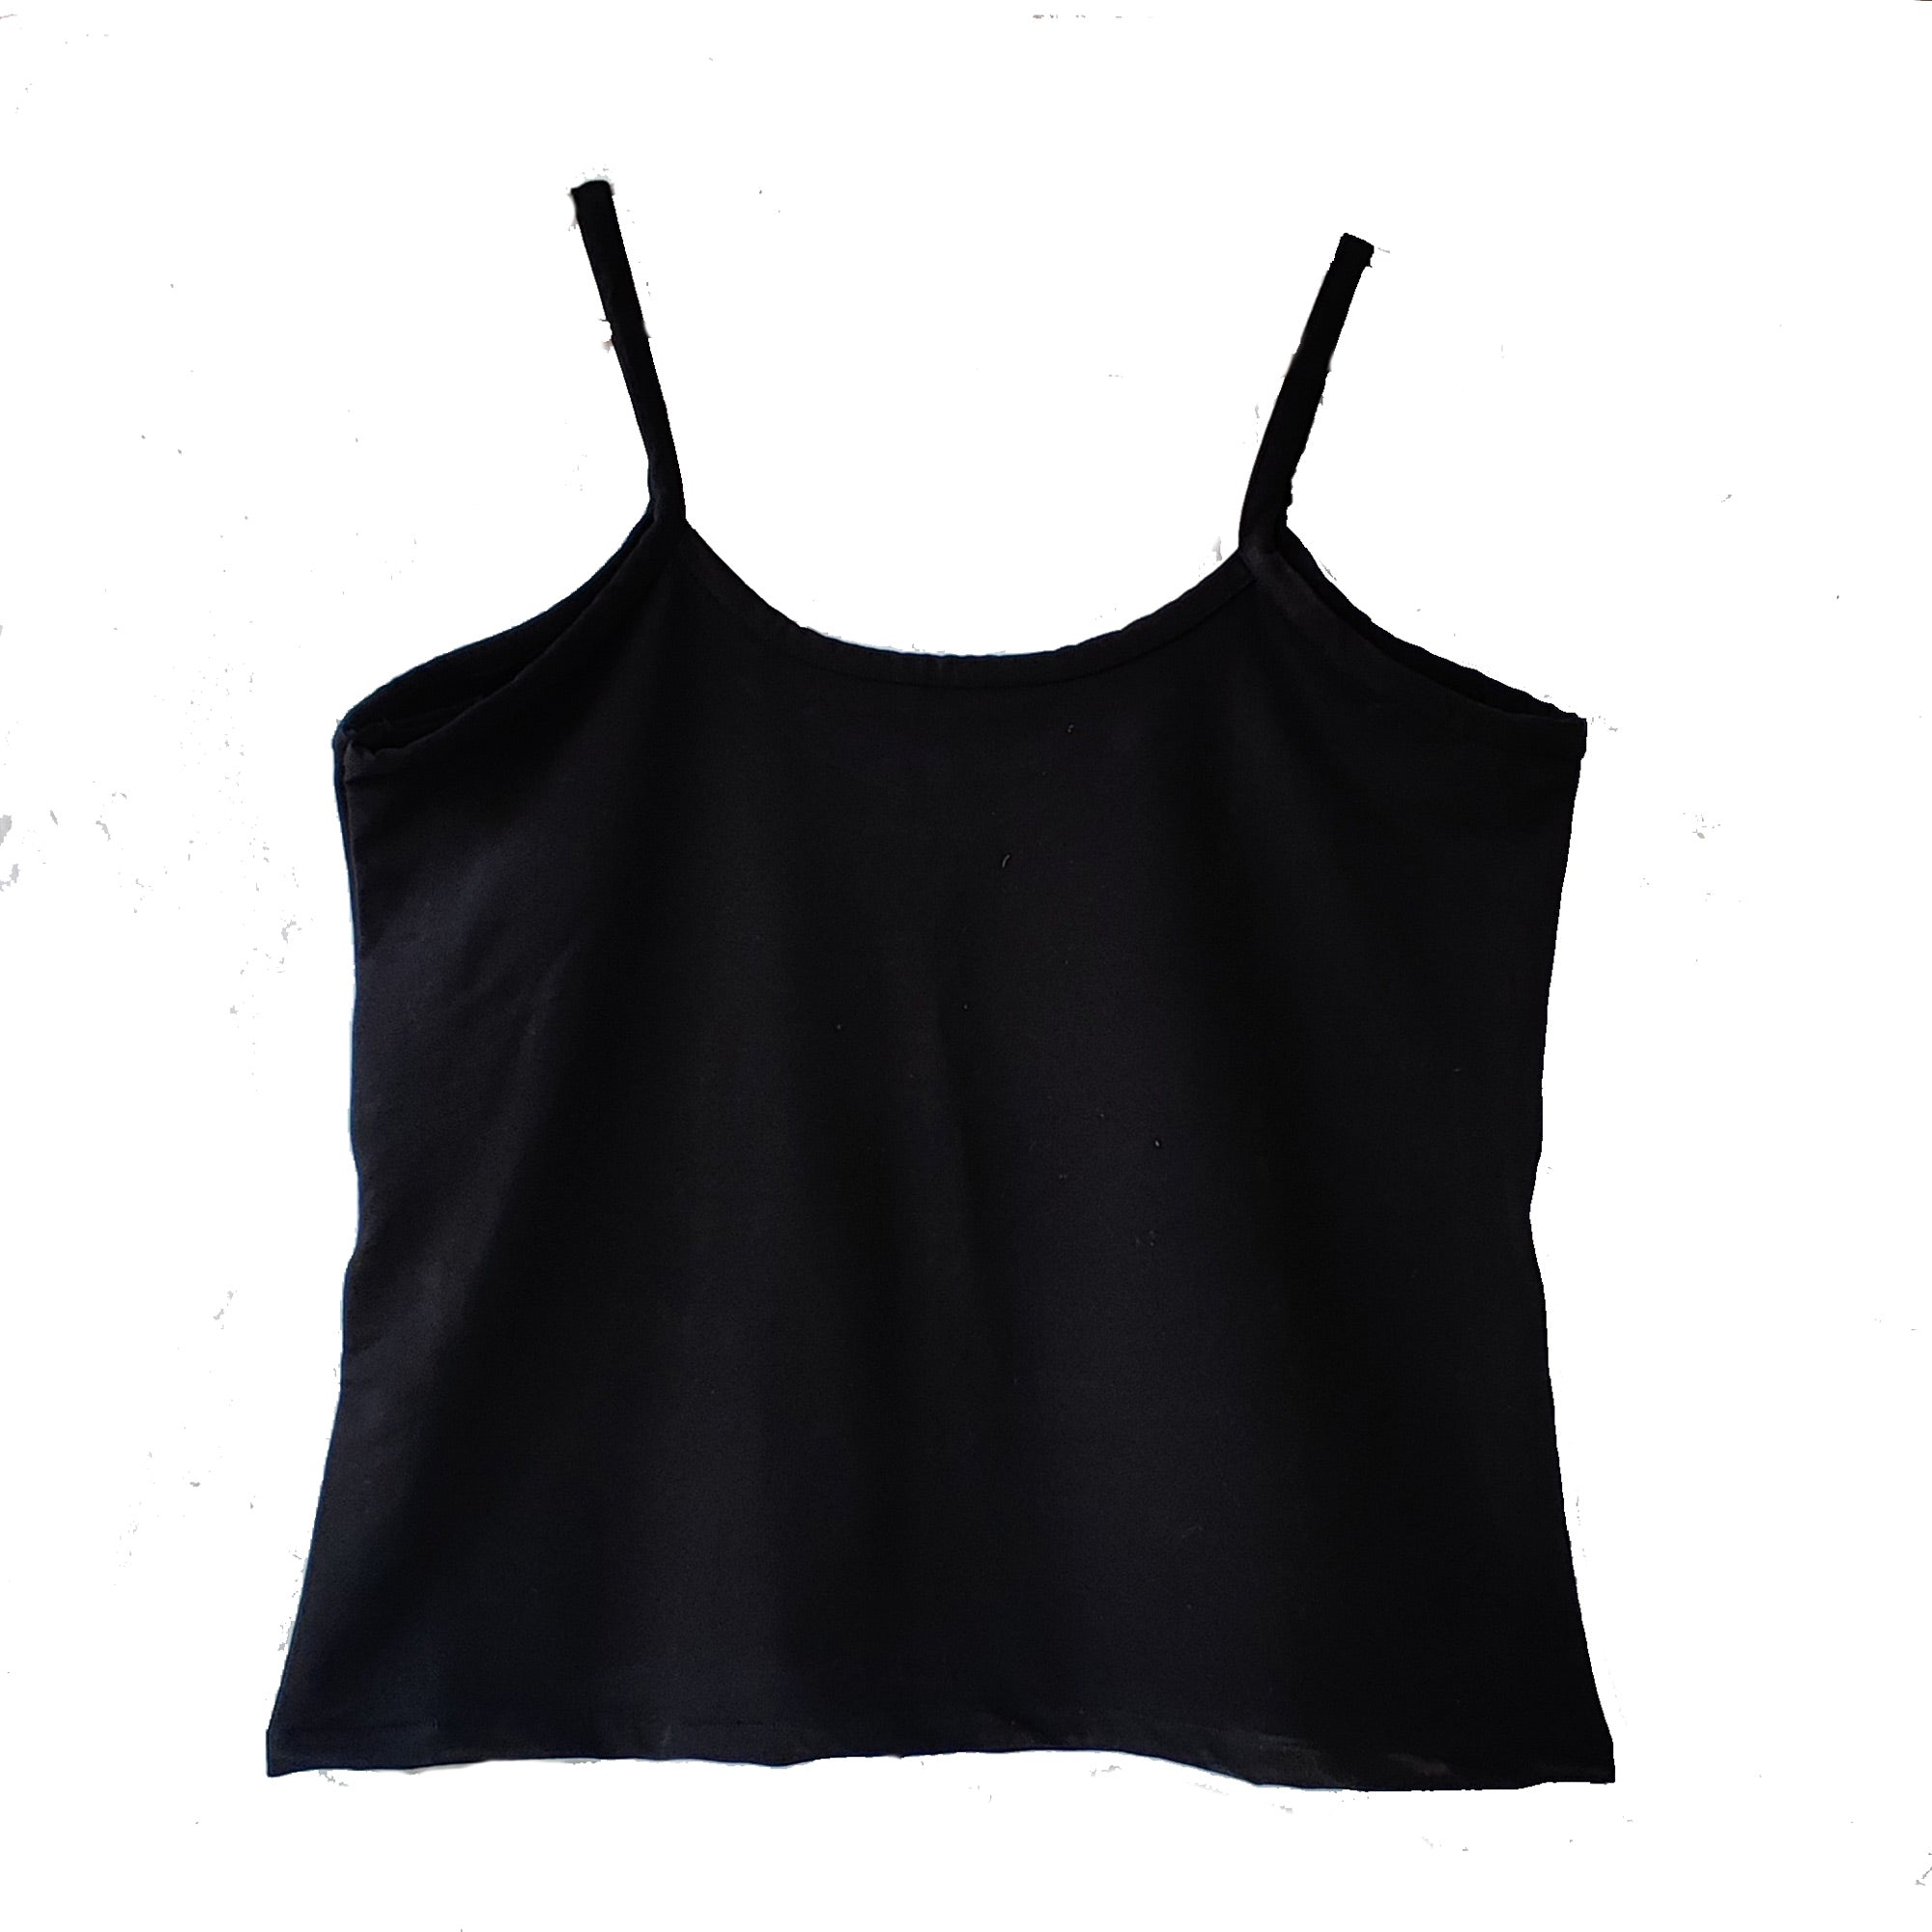 Black 4-Way Stretchable Camisole Top